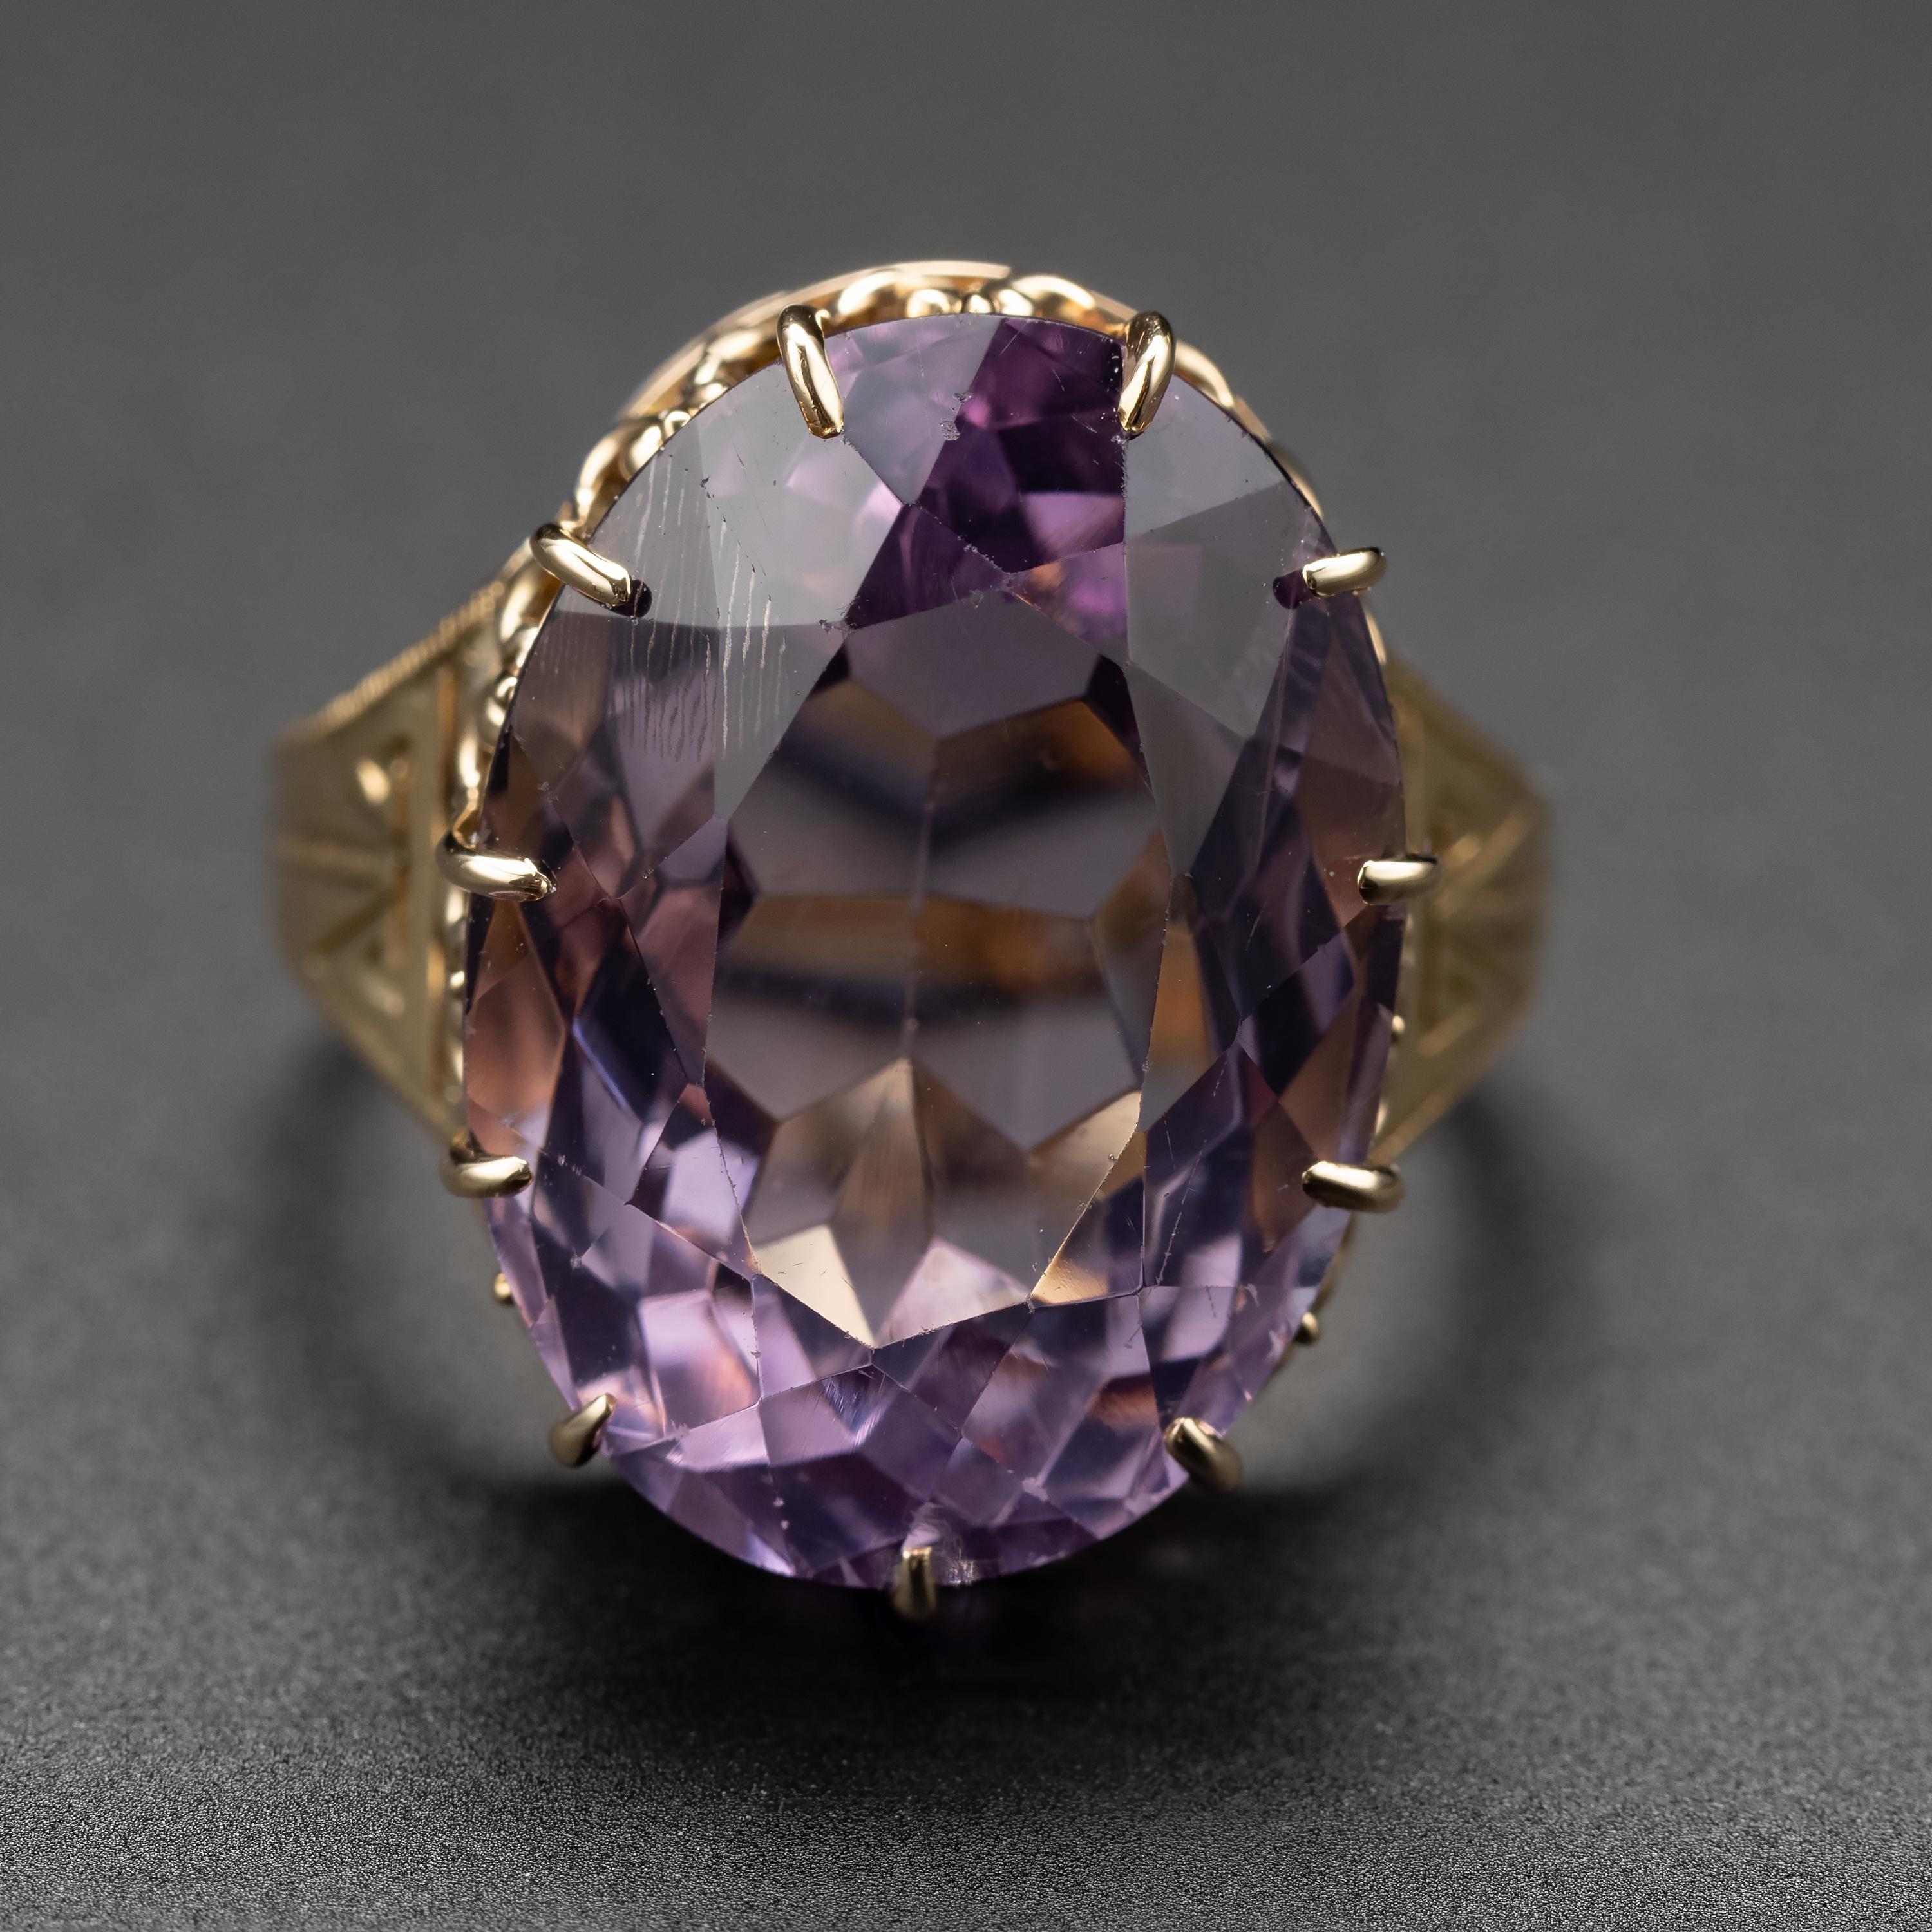 Rose de France is what the French call amethyst of this captivating lilac tone. Whereas 